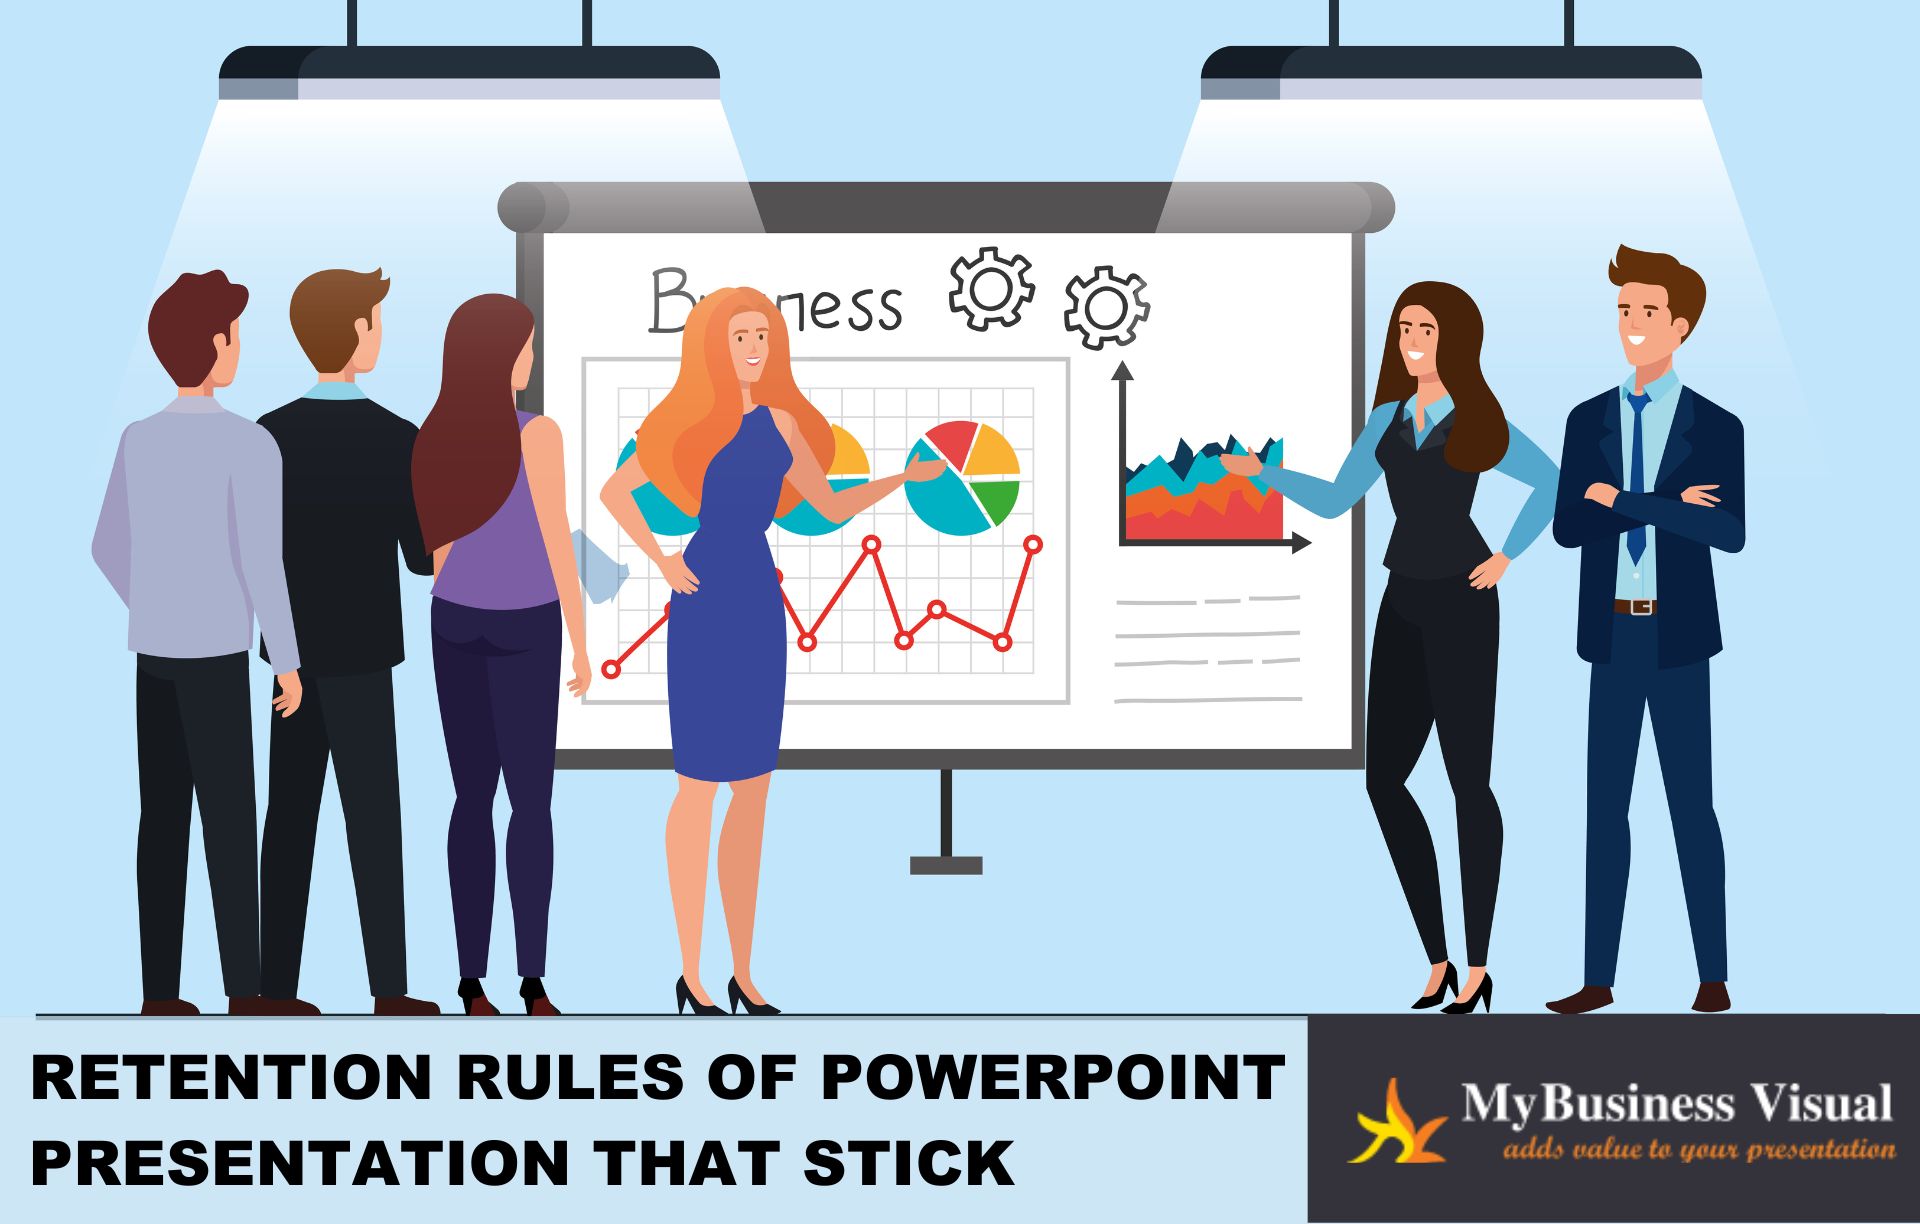 Retention rules of PowerPoint presentation that stick